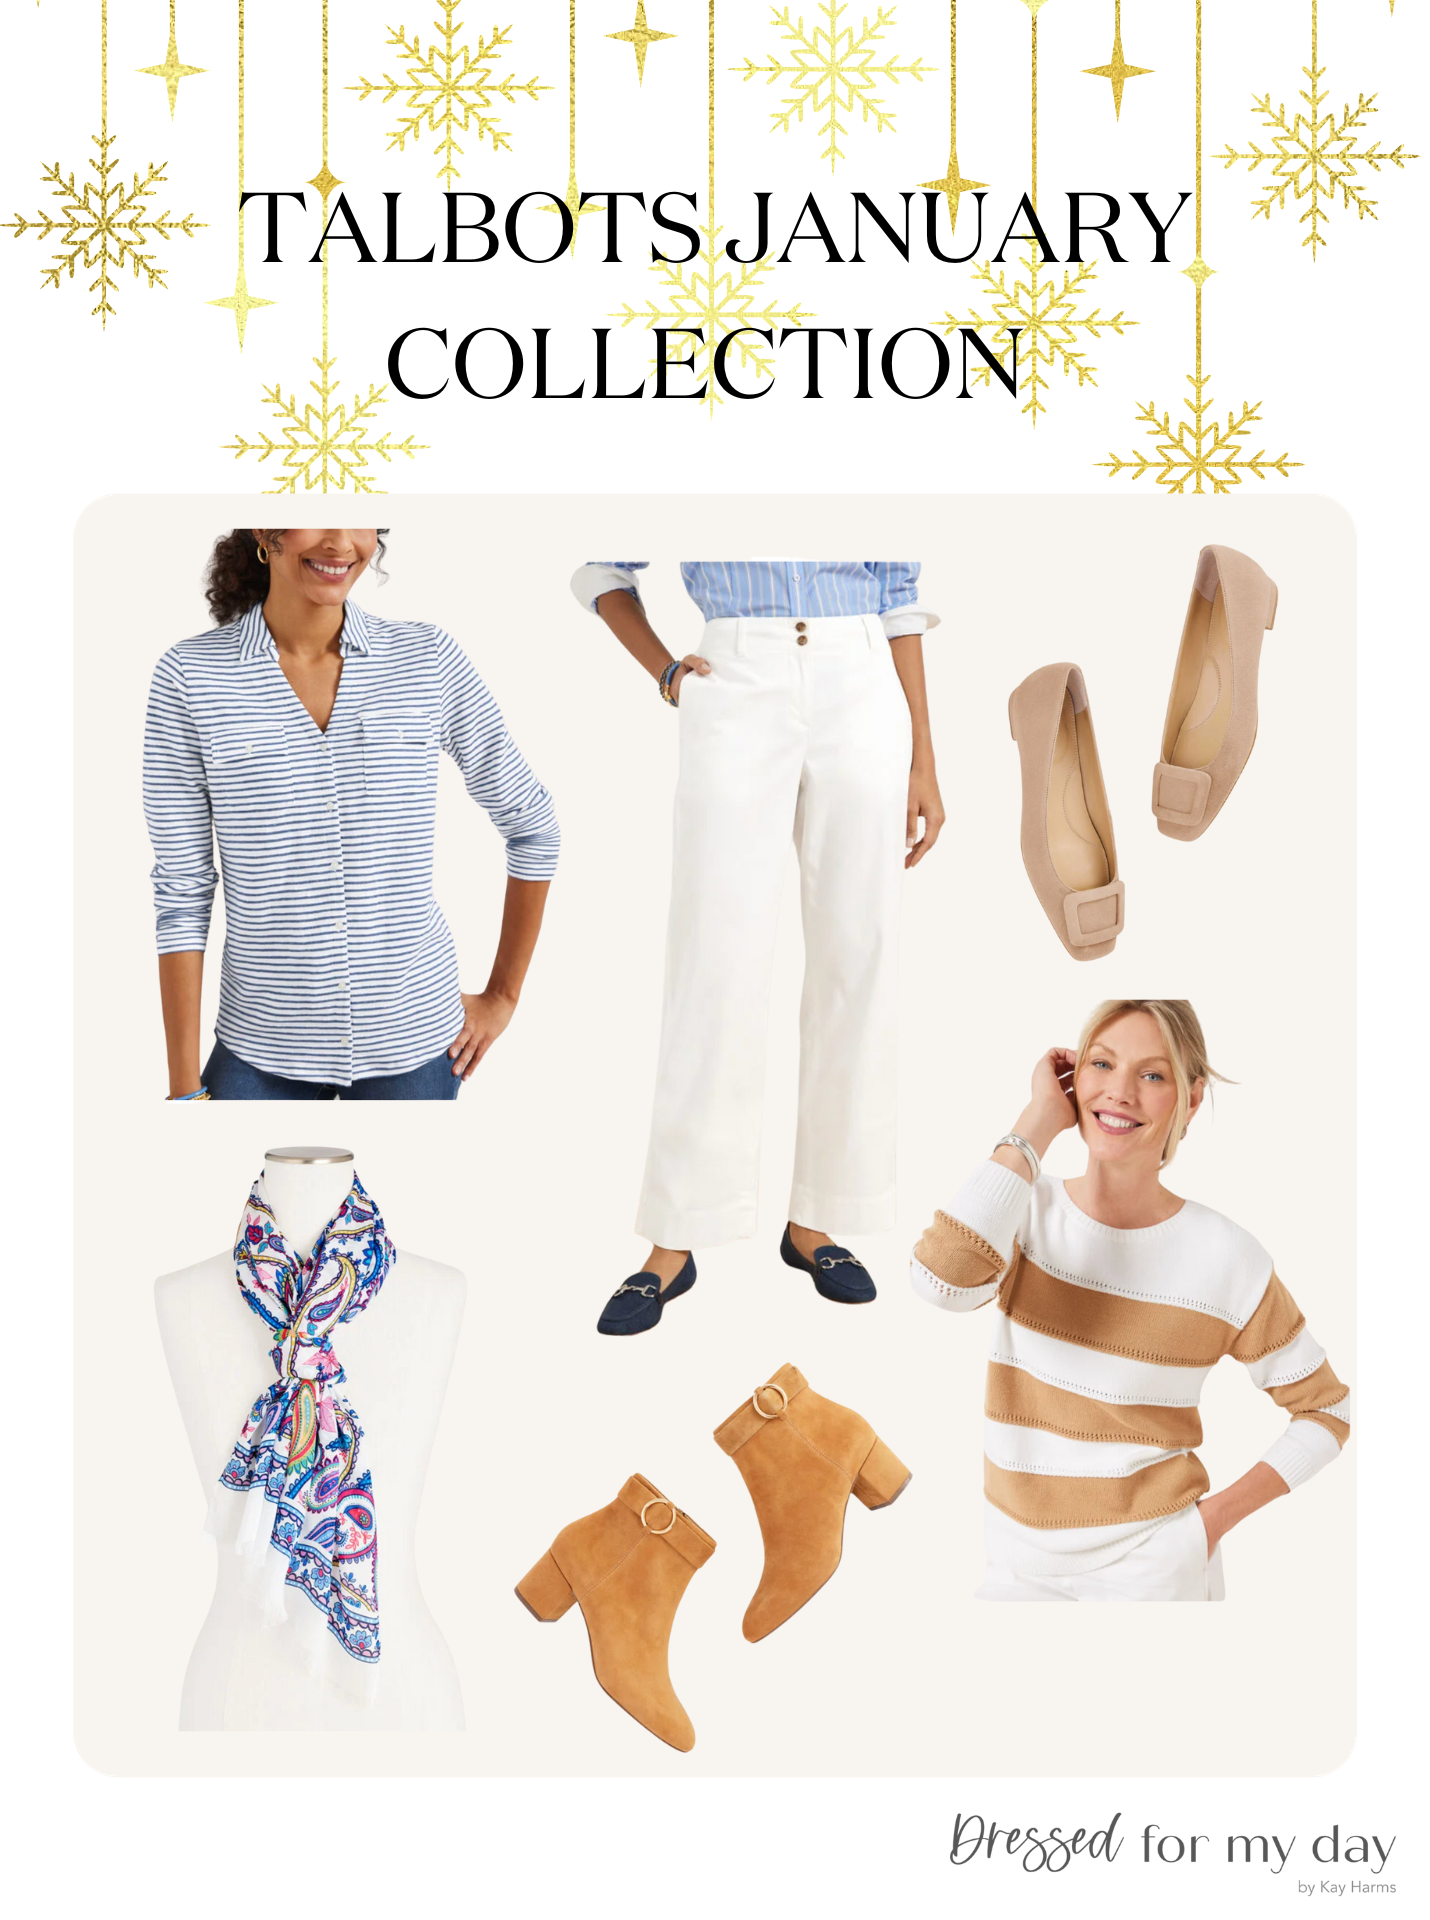 My Favorites from the Talbots January Collection Dressed for My Day